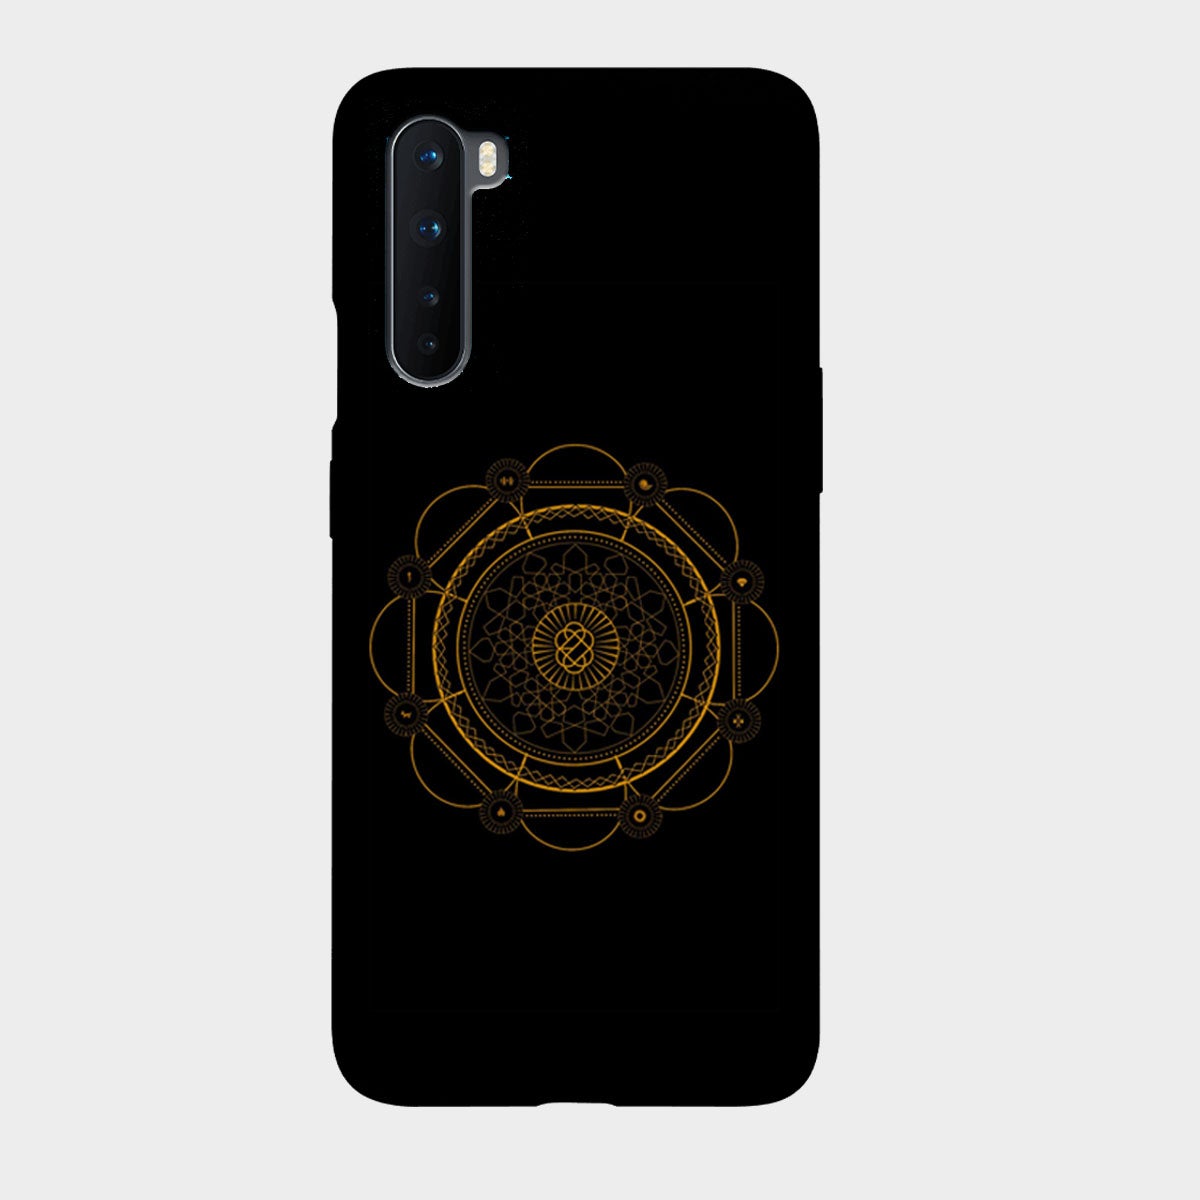 Sacred Games - Mobile Phone Cover - Hard Case - OnePlus